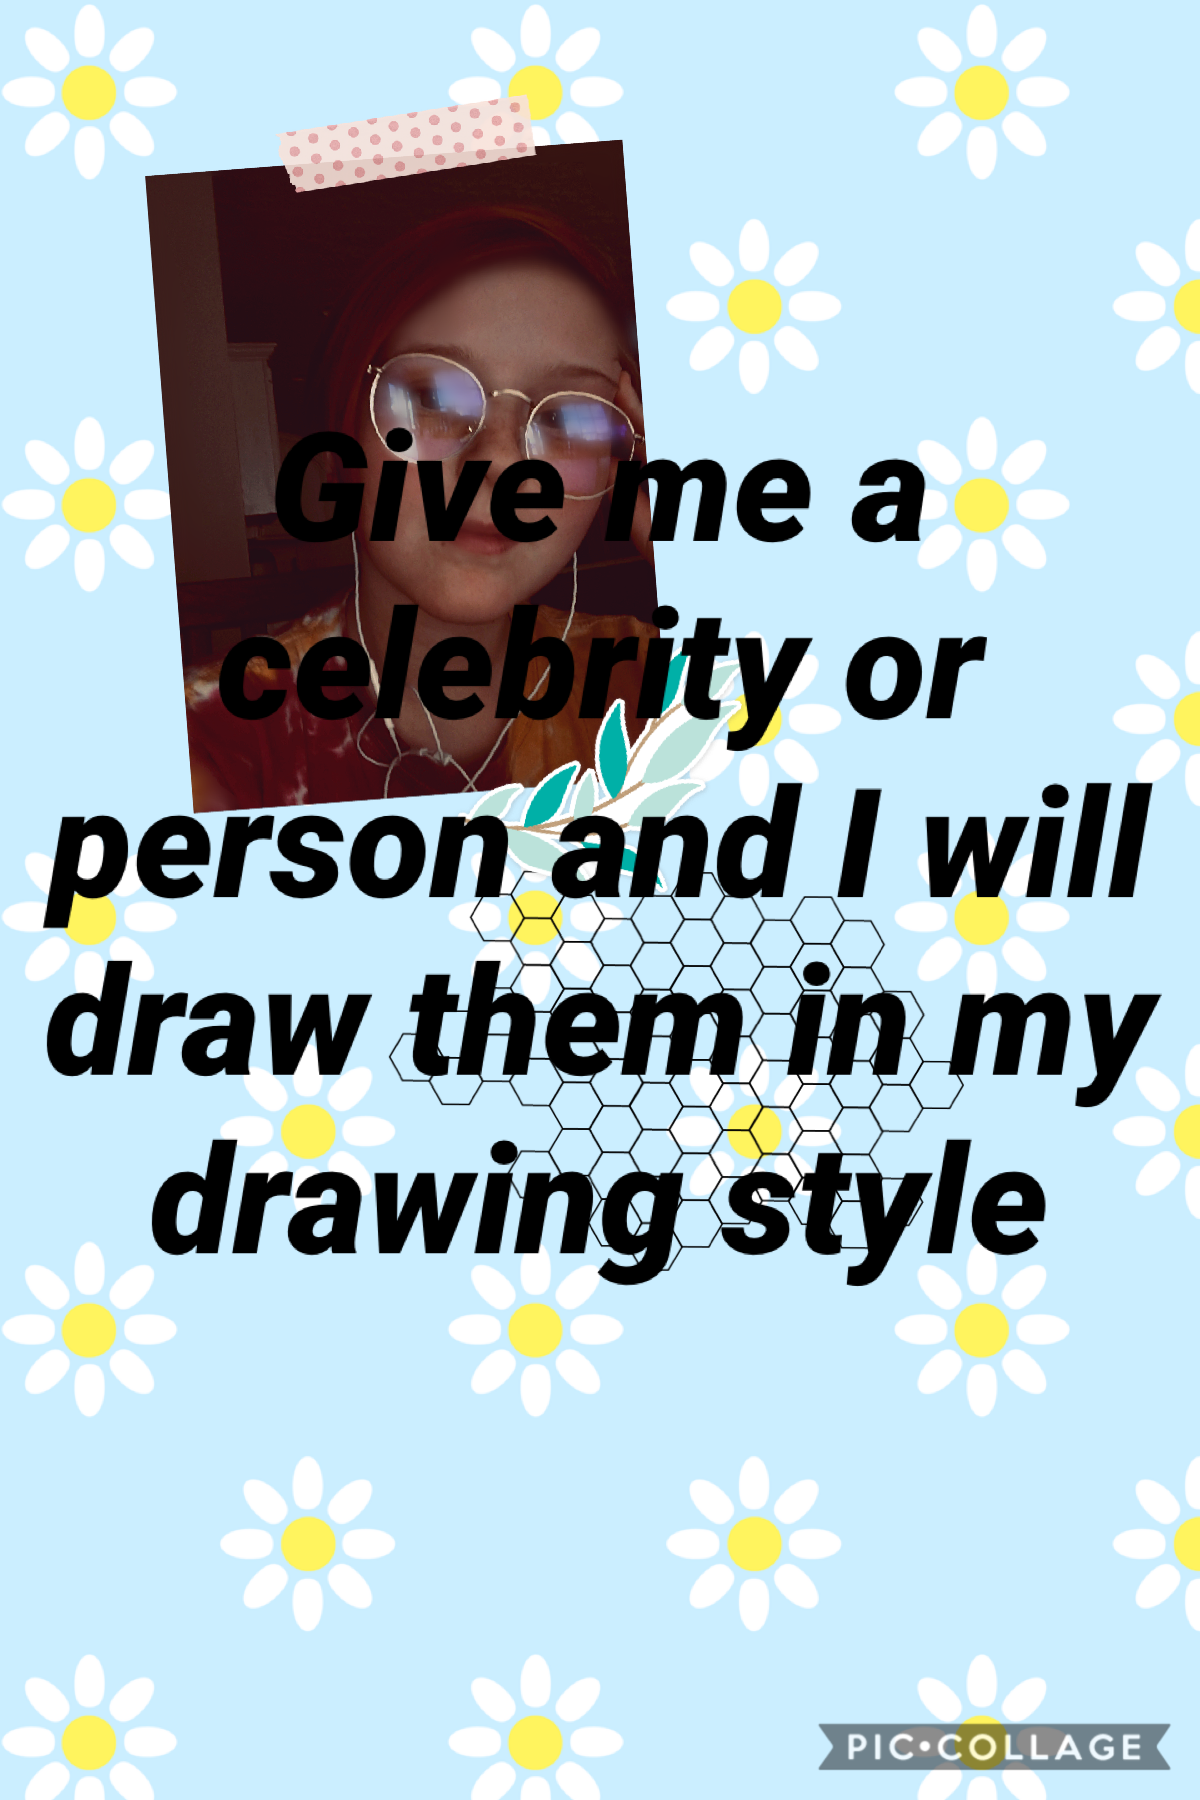 Ill draw any celebrity or person in my drawing style!! Just comment with one👍🏳️‍🌈❤️